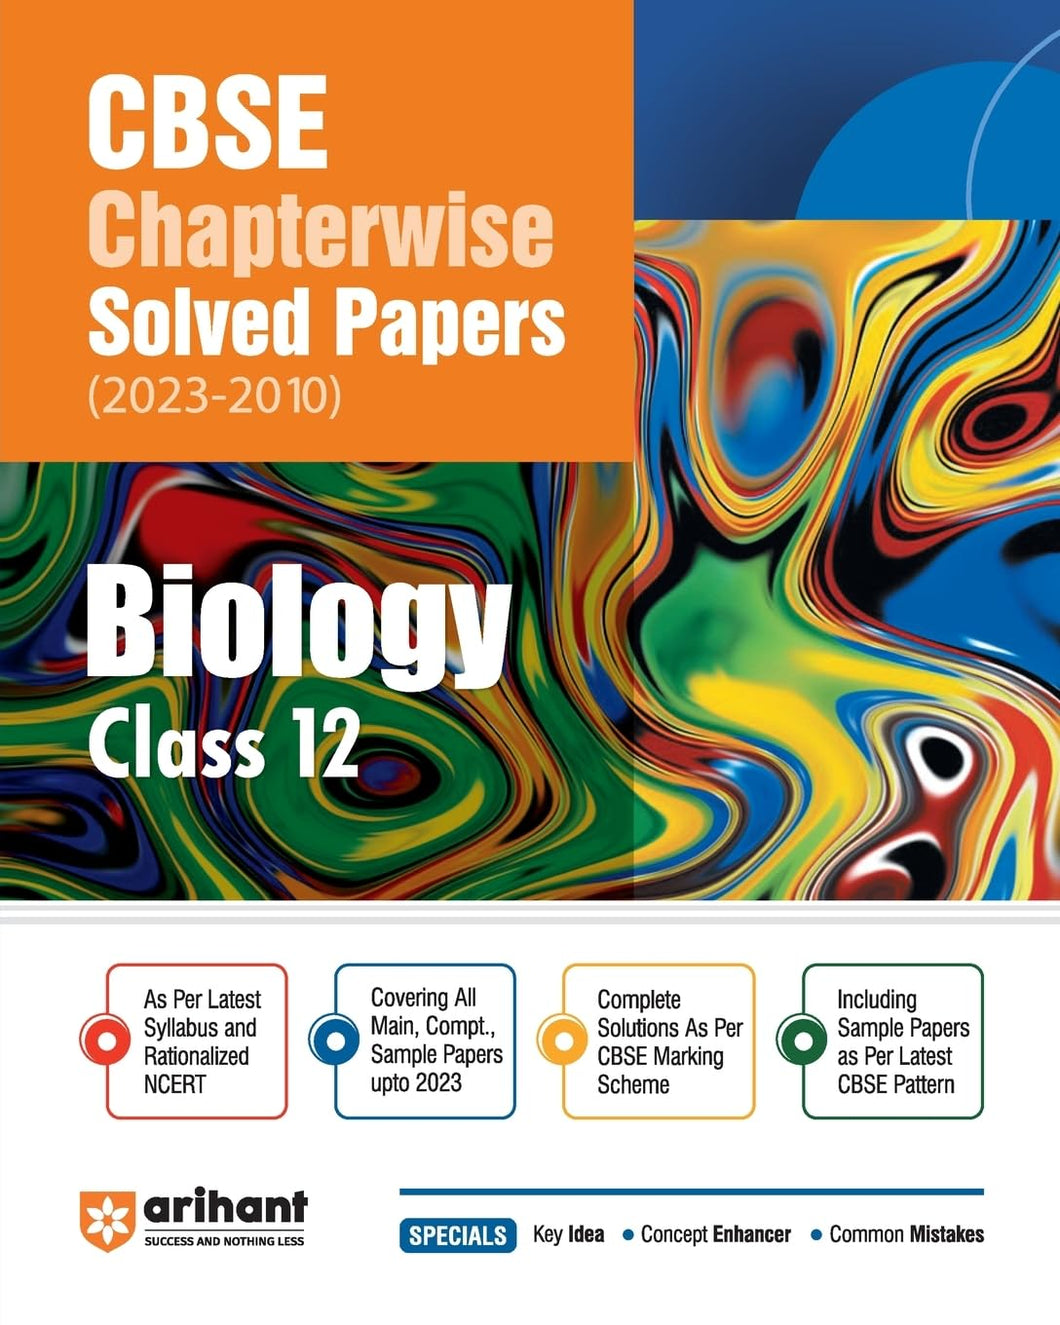 CBSE Biology Chapterwise Solved Papers Class 12